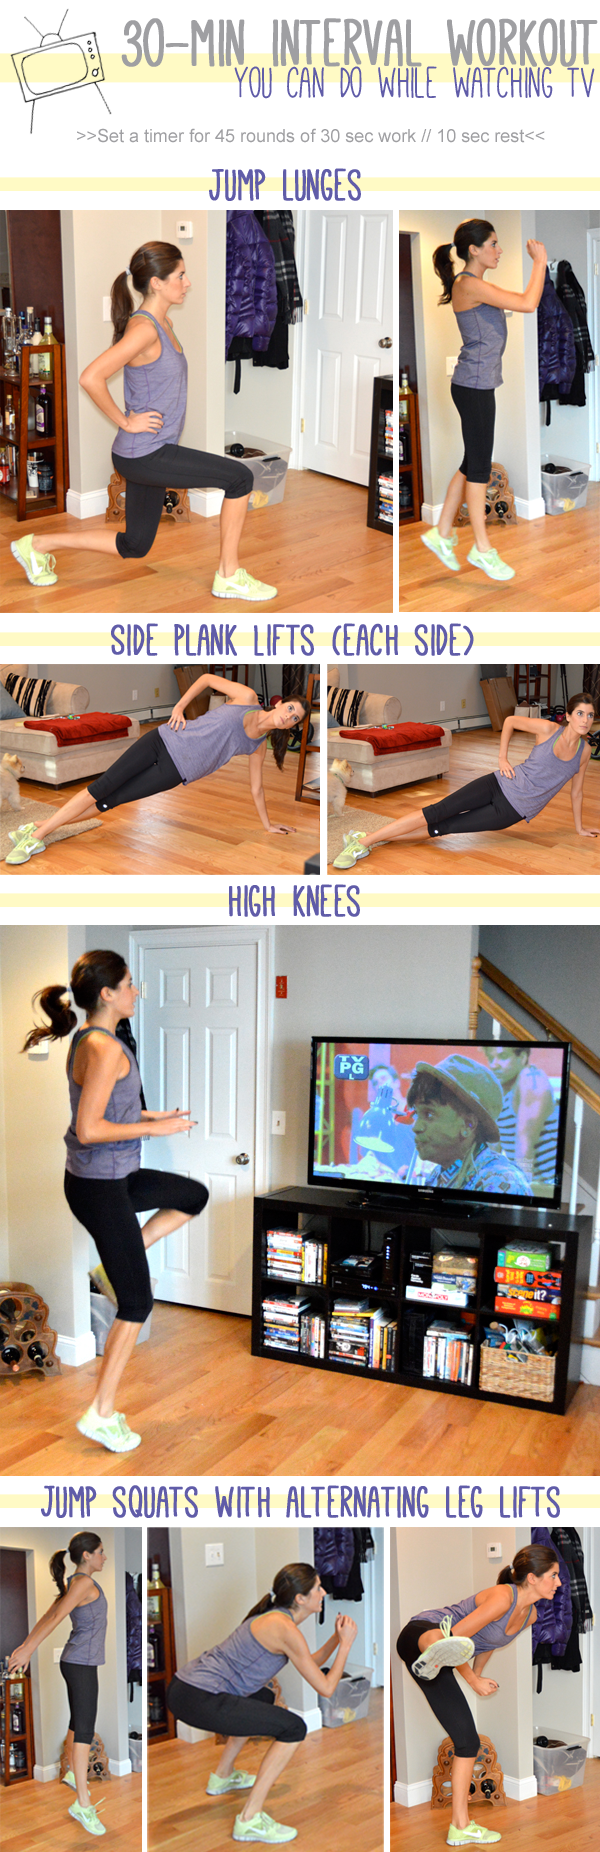 30-Minute Interval Workout You Can Do While Watching TV. No equipment needed and